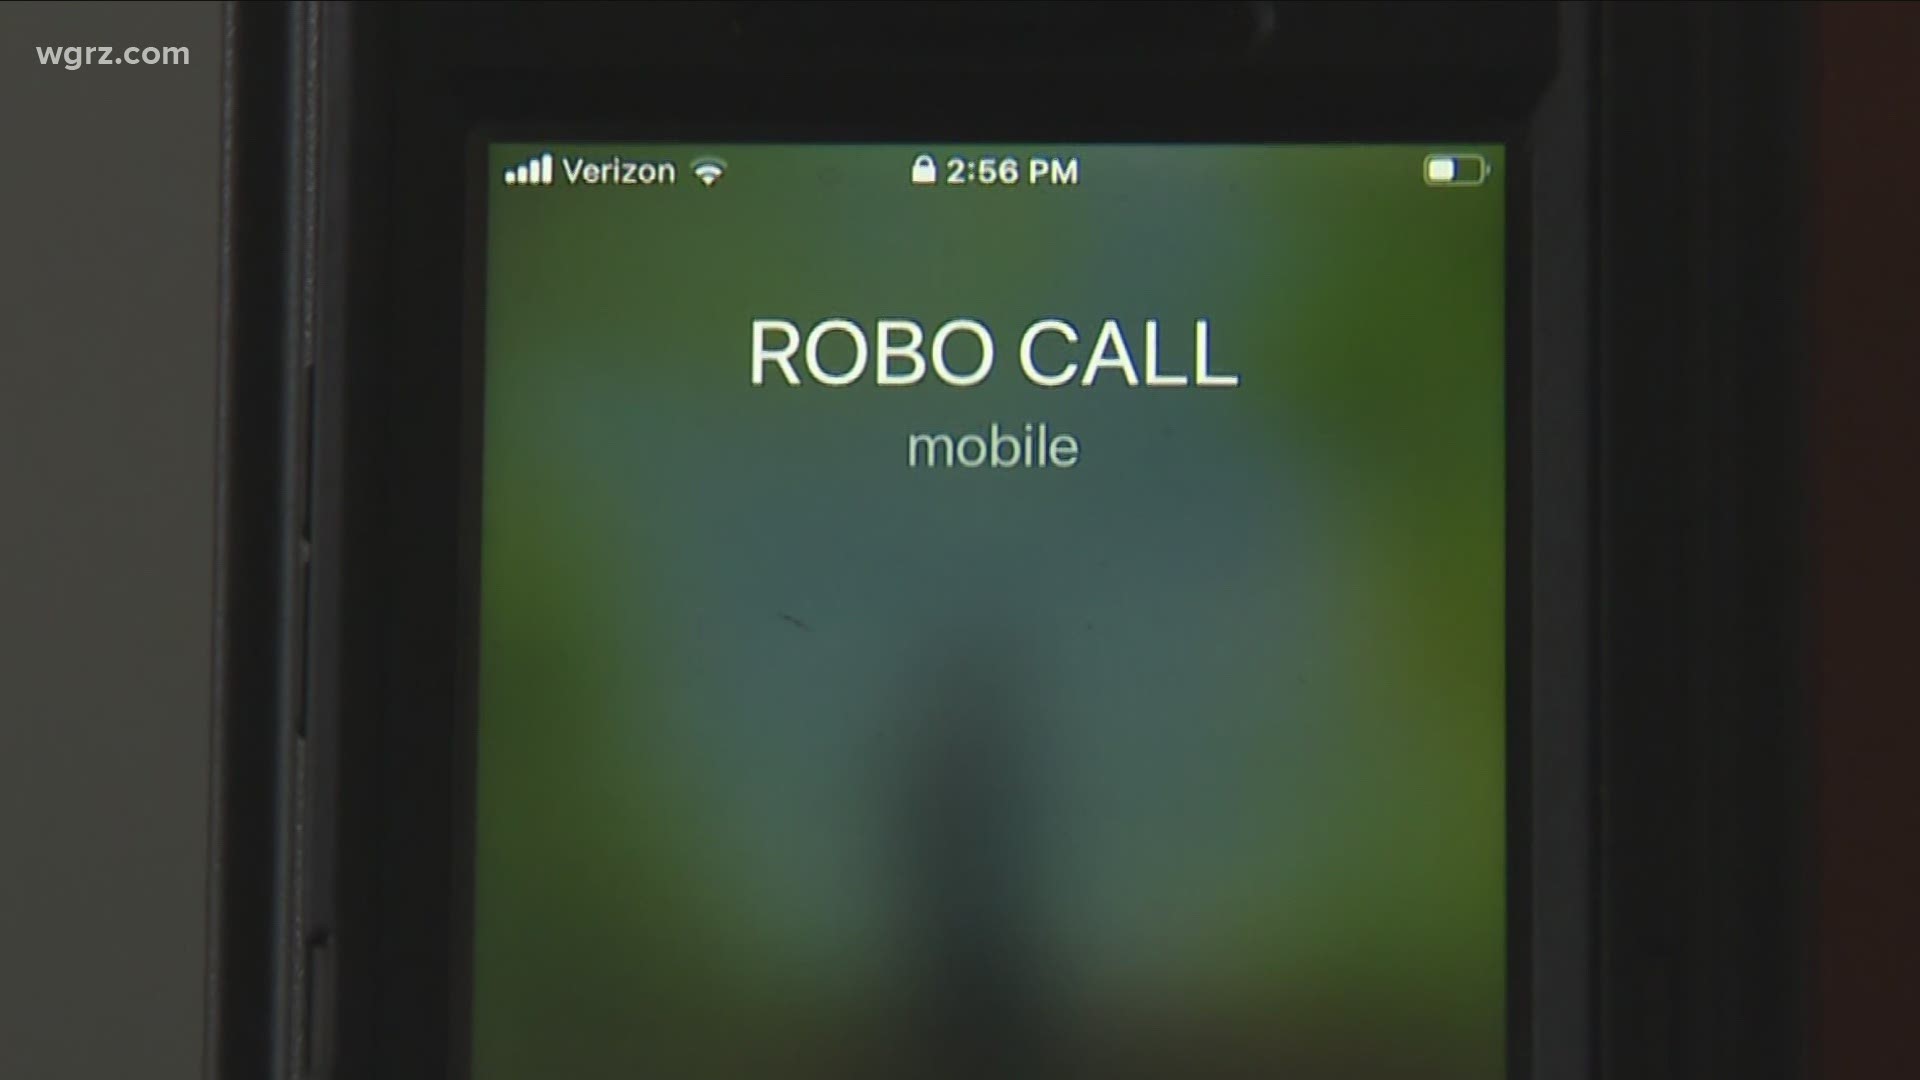 Our Effort To Help End Robocalls